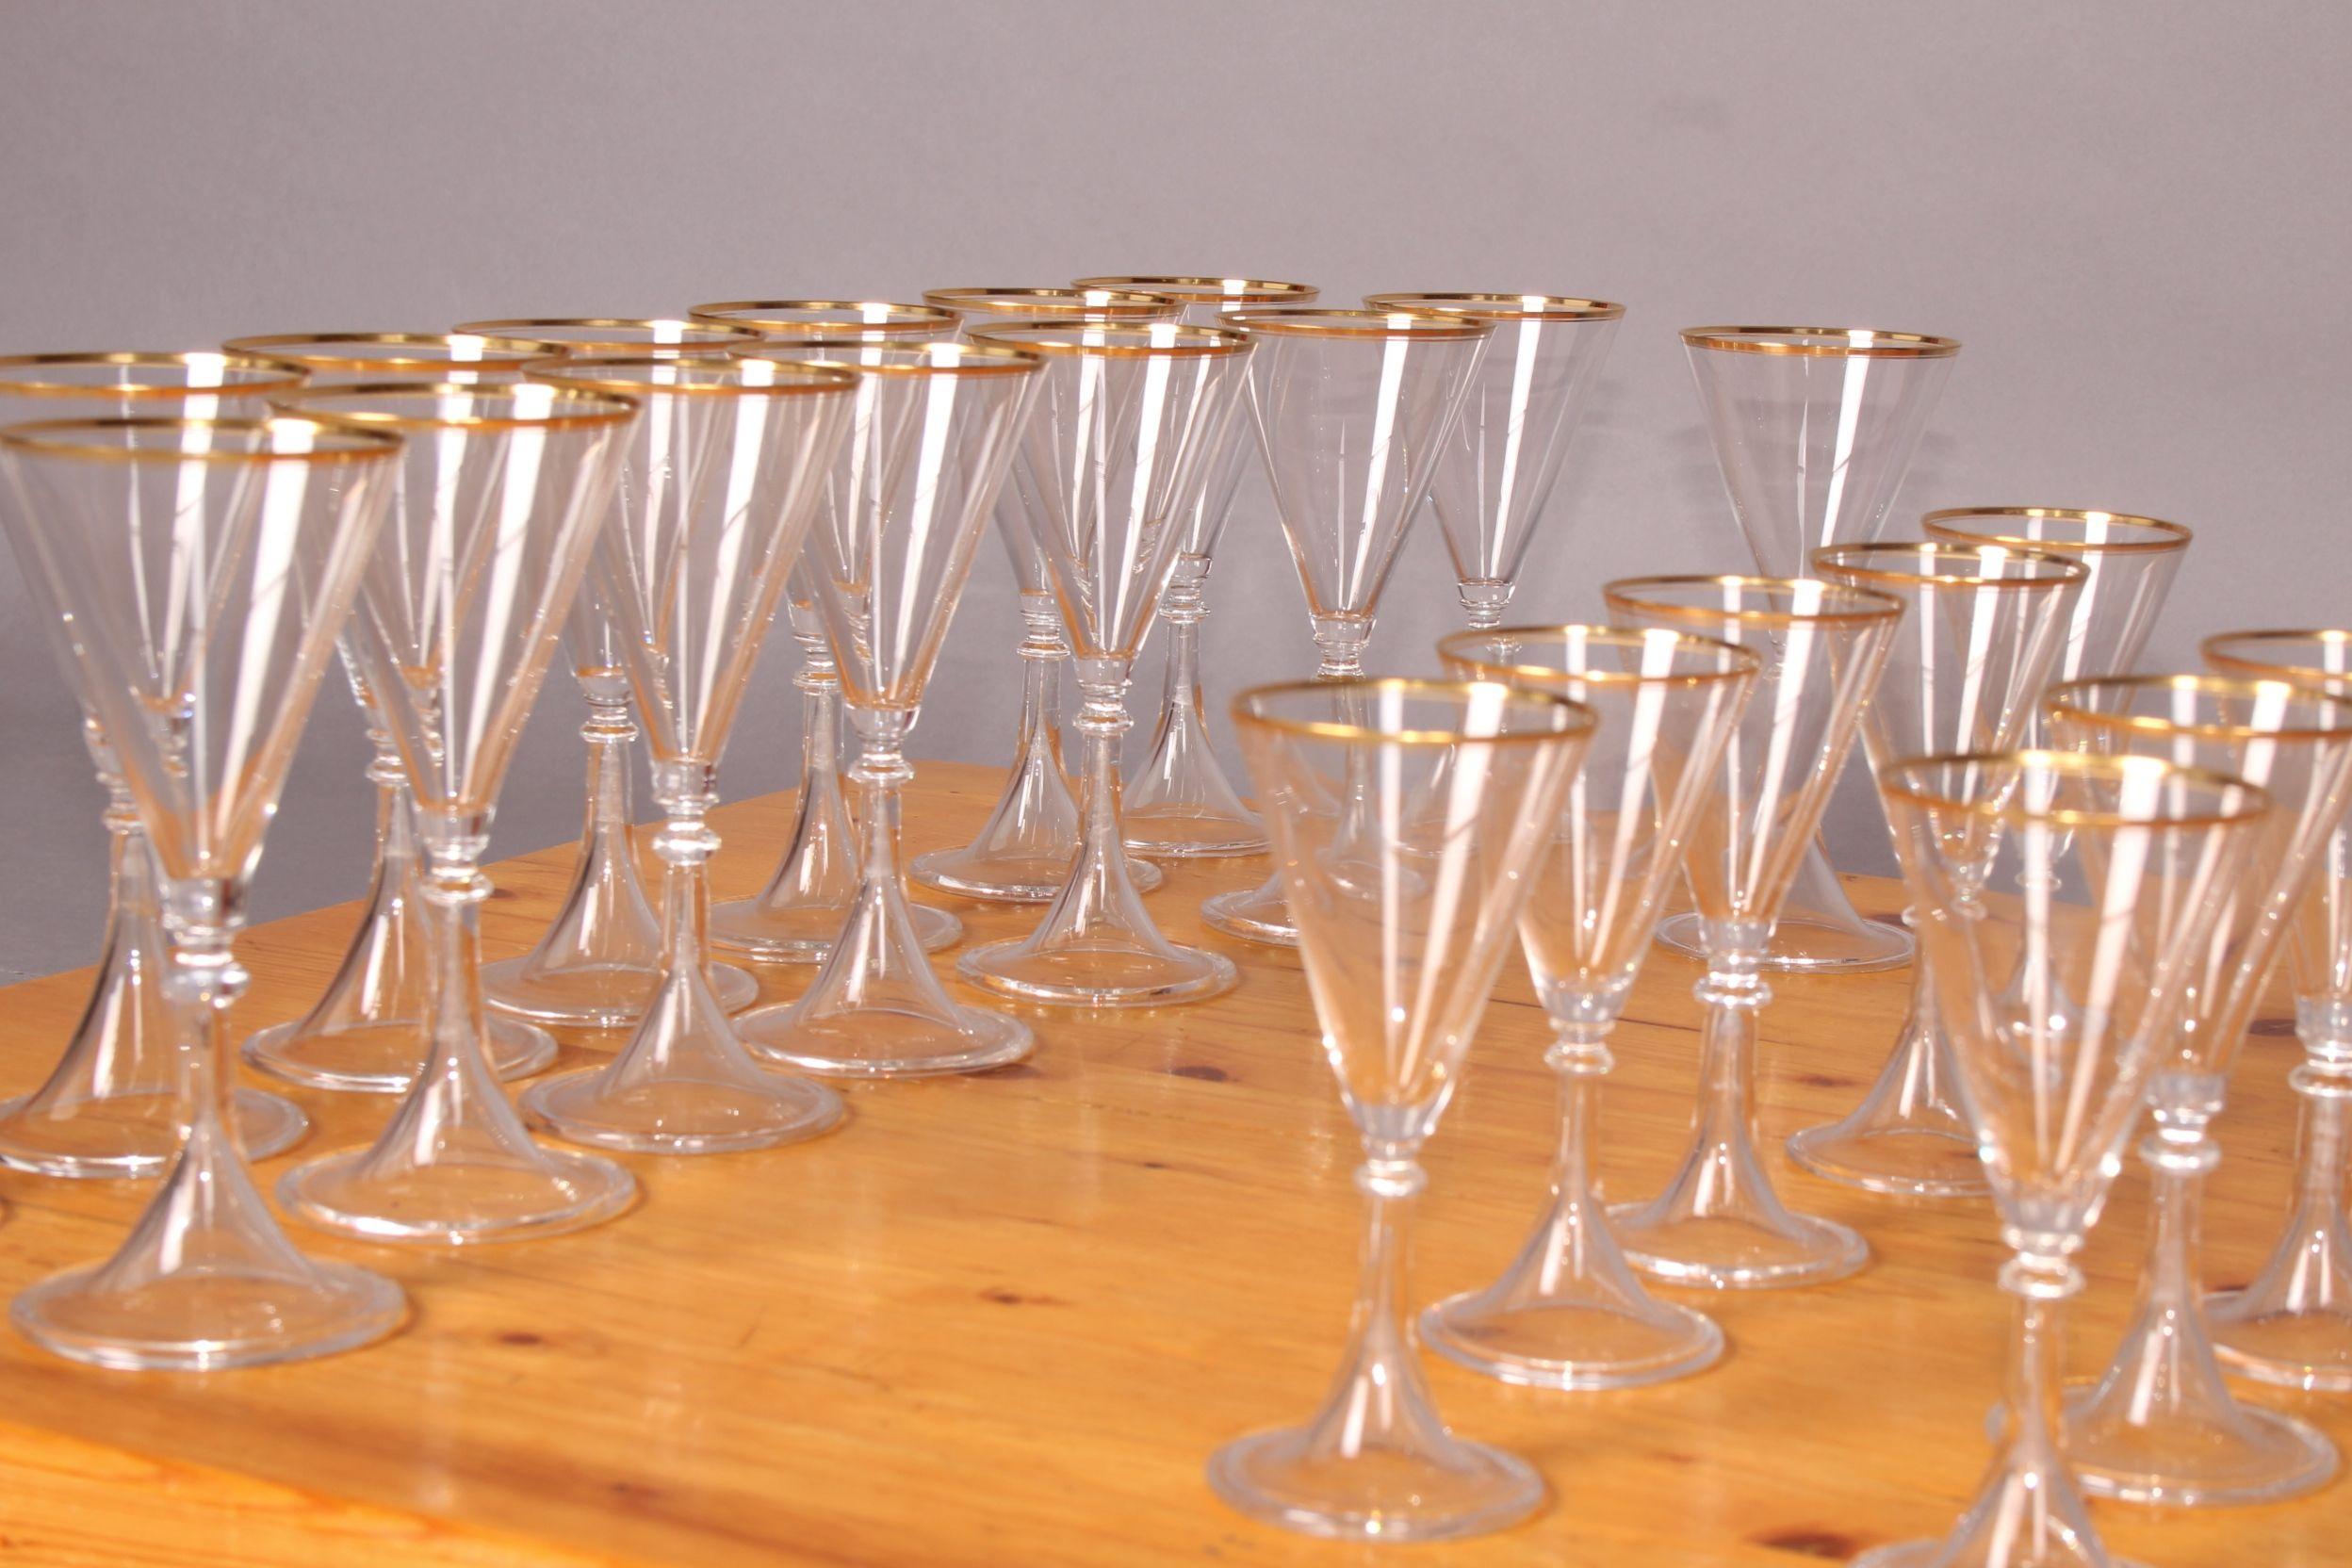 40 drinking glass, small 15 pieces measures: H 13, D 5.5 cm, middle 15 pieces H 16, D 7 cm, big 10 pieces H 16.5, D 8.